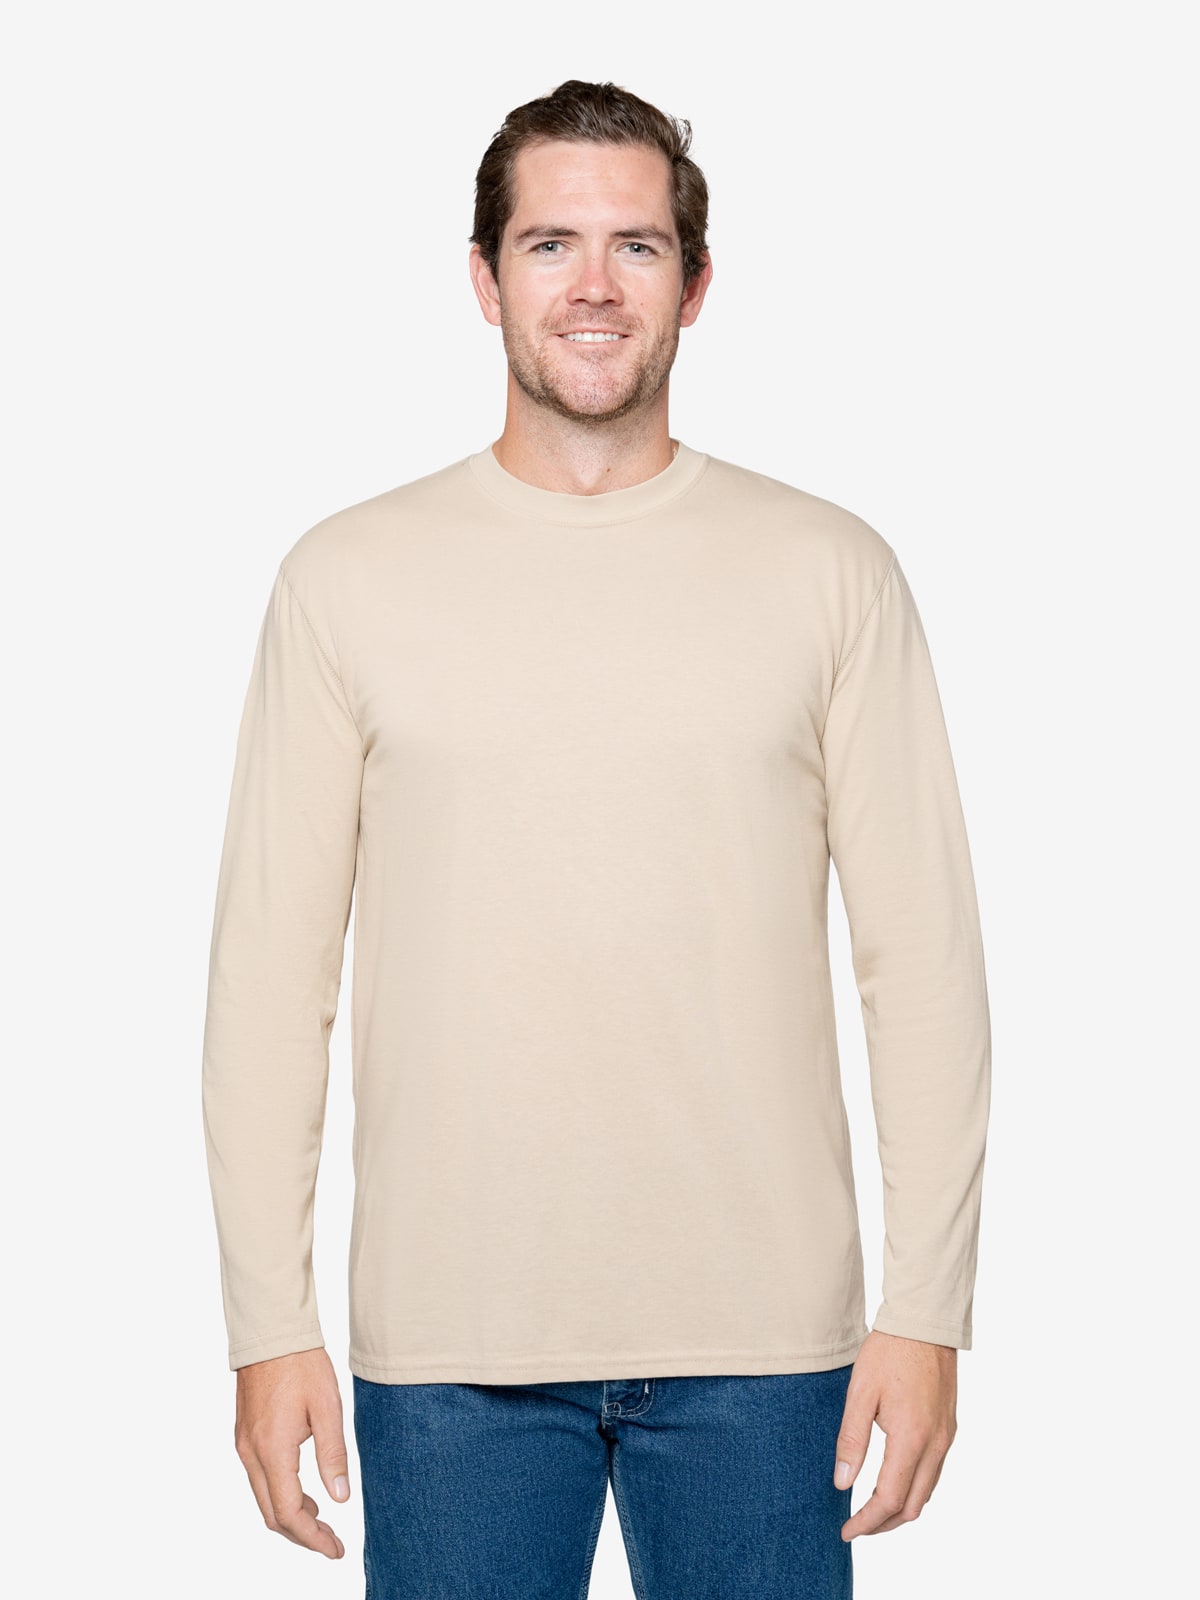 Insect Shield Men's Long Sleeve Wicking T-Shirt